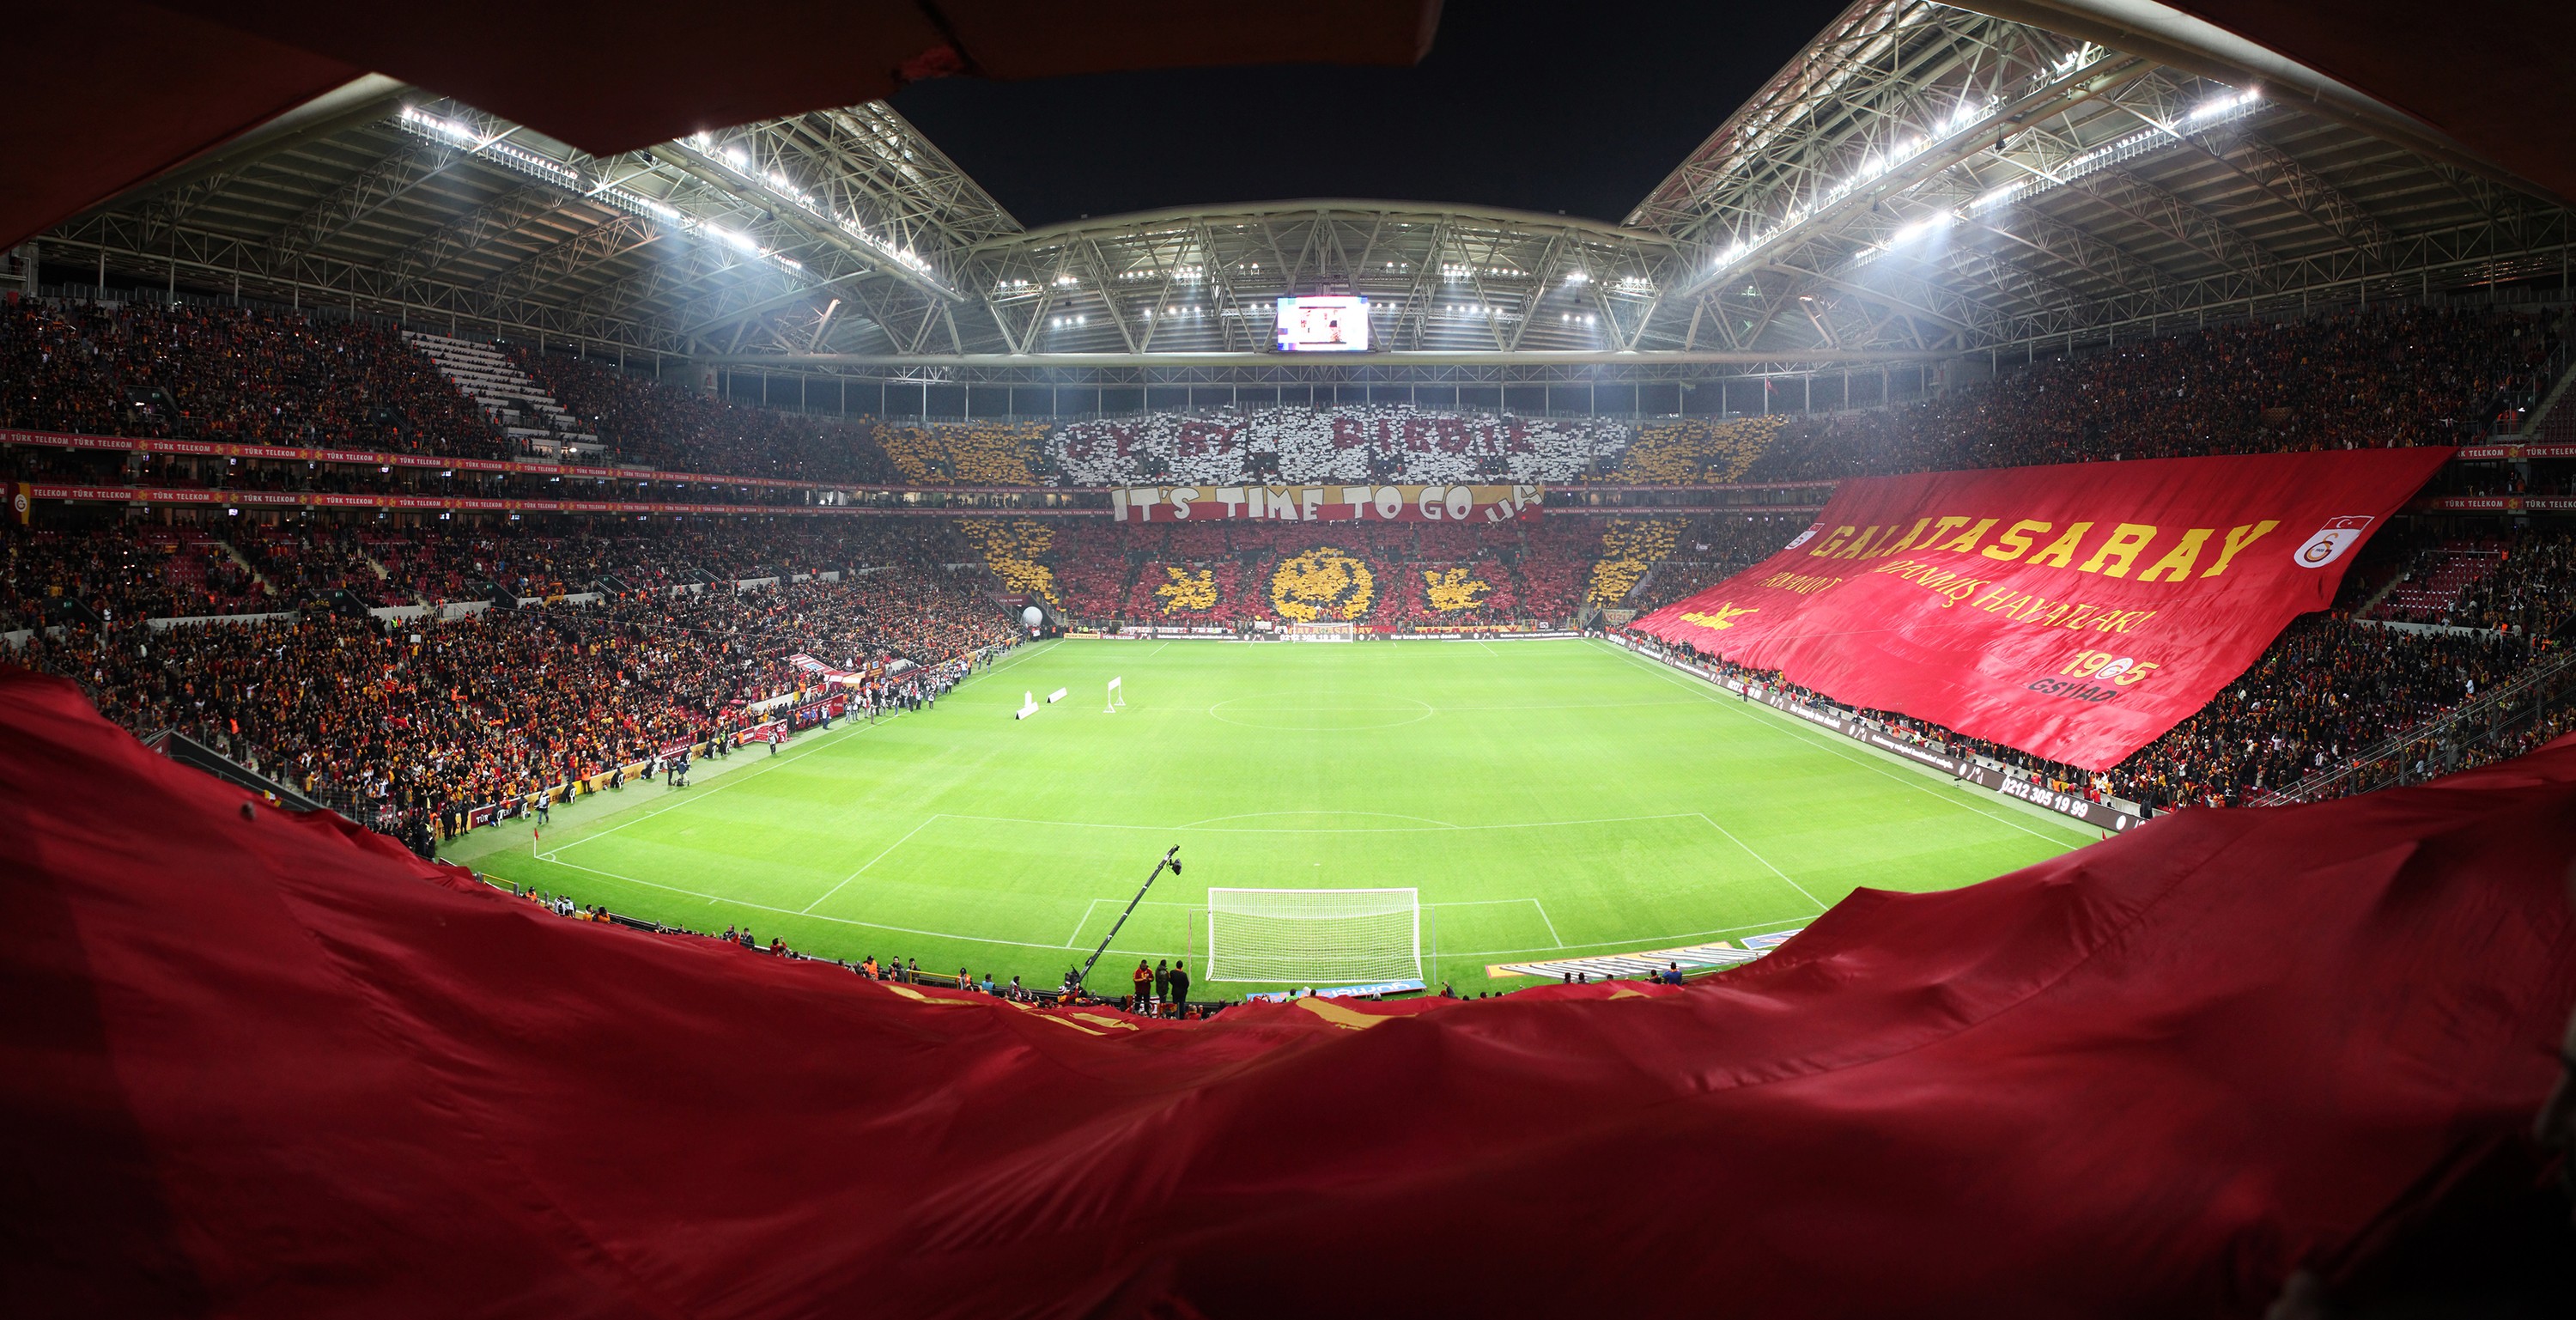 General 3000x1537 Galatasaray S.K. soccer pitches soccer fans yellow red sport stadium